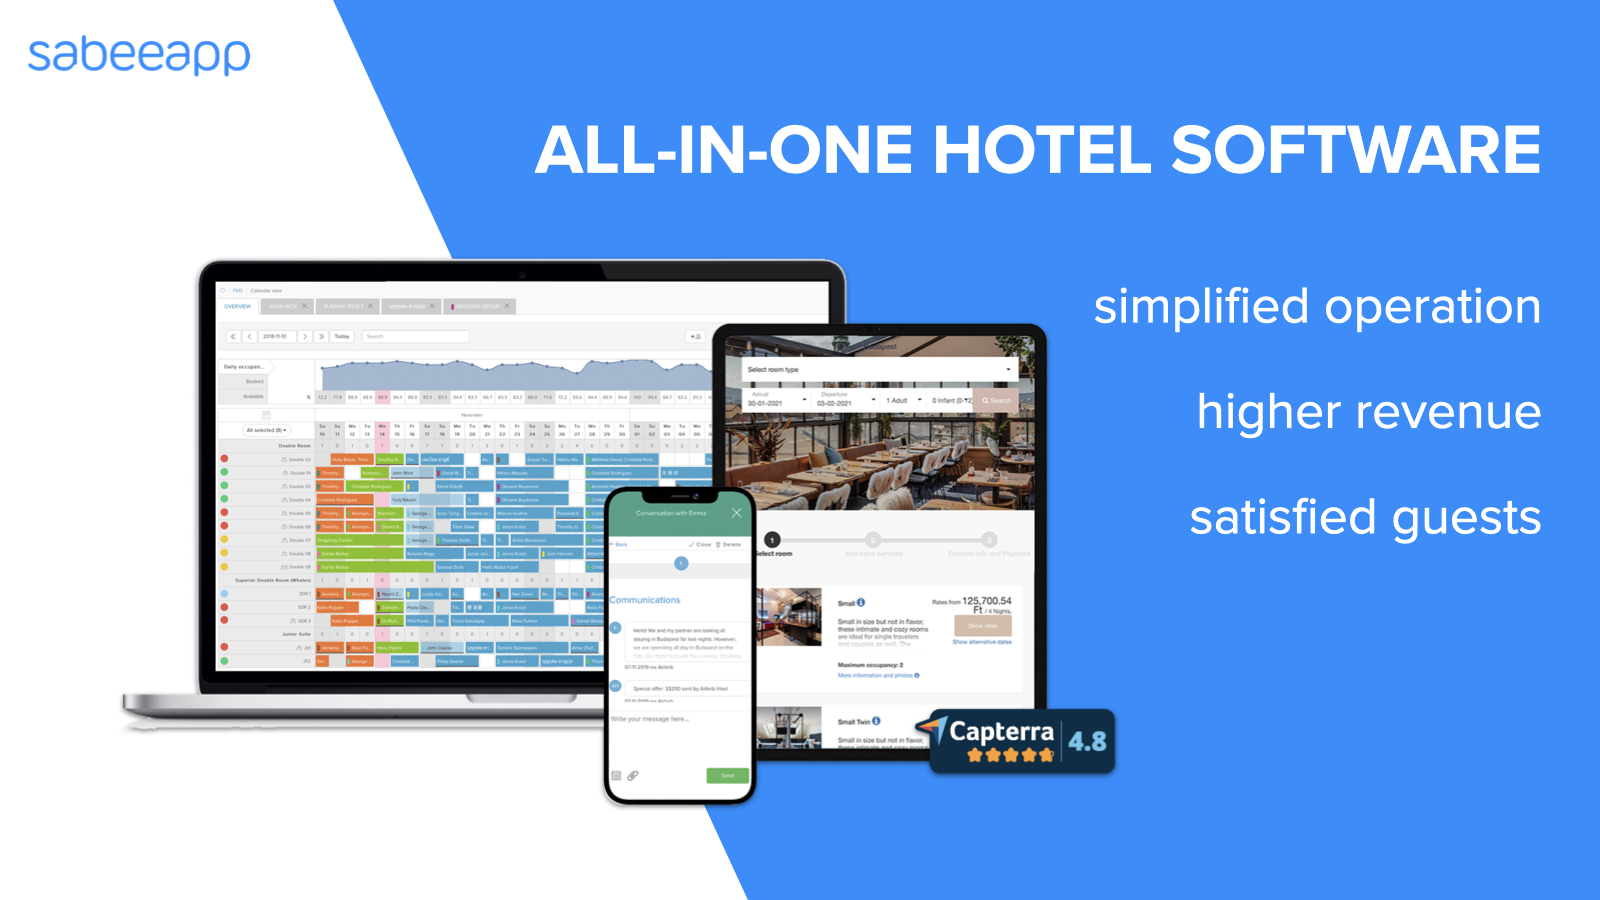 All-in-one hotel software